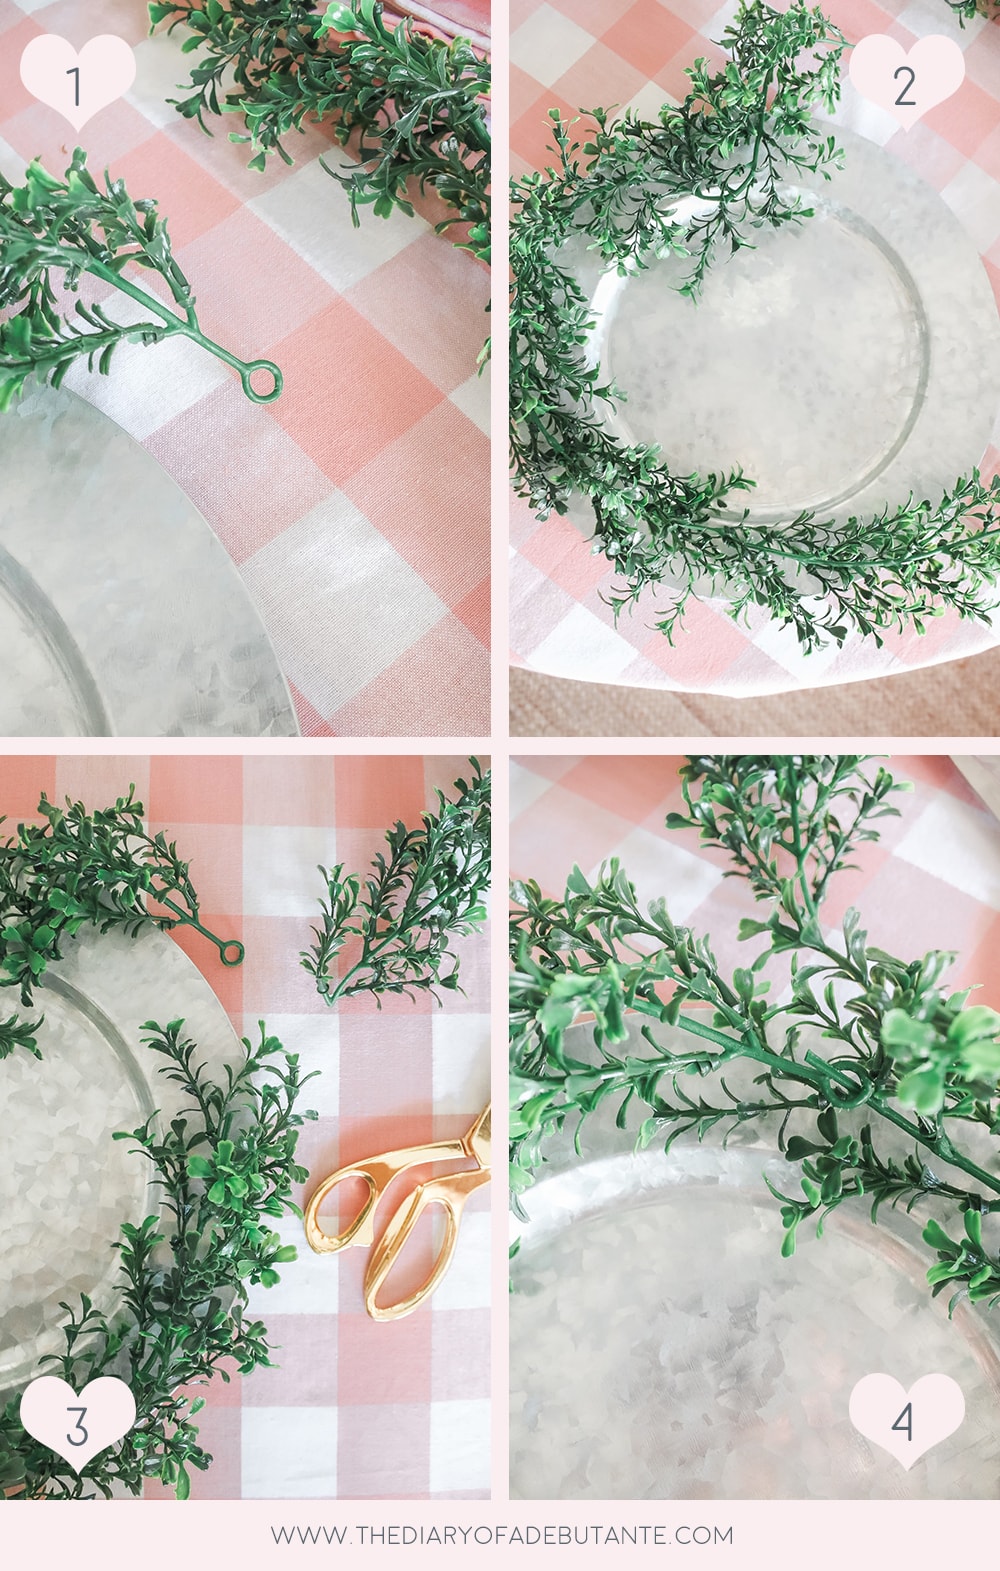 DIY blogger Stephanie Ziajka shows how to make your own DIY charger plates with faux boxwood garland on Diary of a Debutante